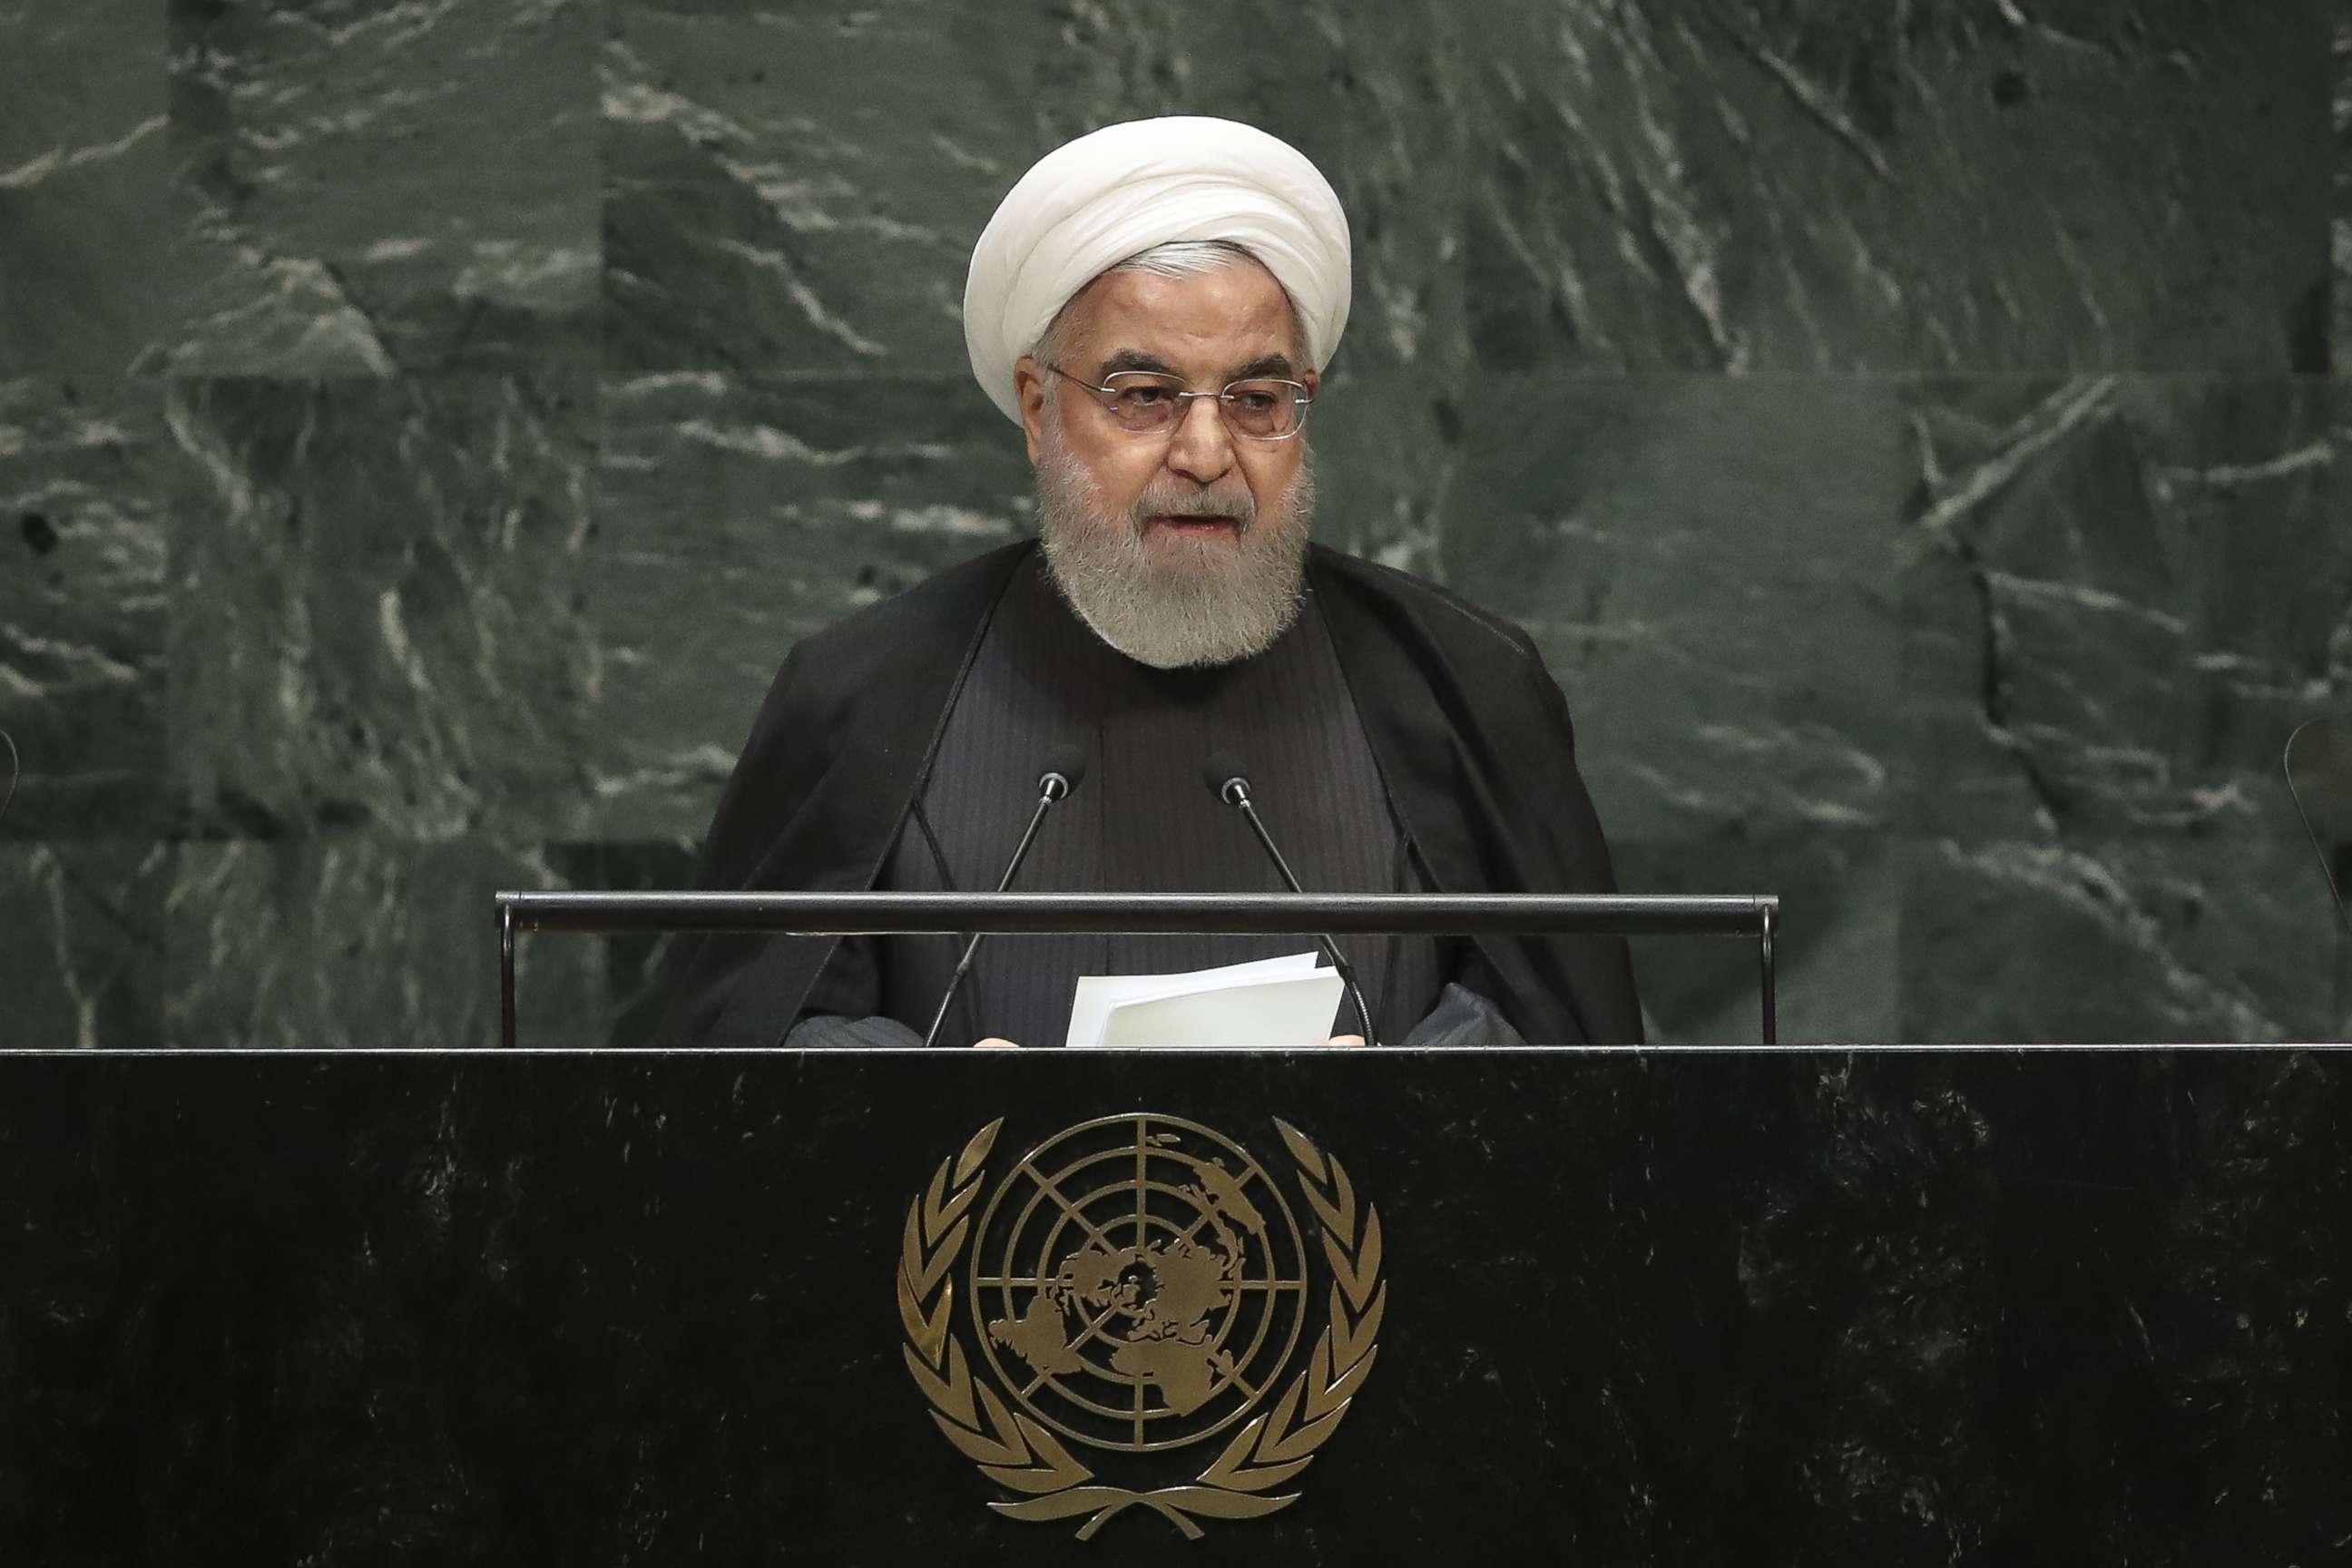 PHOTO: President of Iran Hassan Rouhani addresses the United Nations General Assembly at UN headquarters on September 25, 2019, in New York.